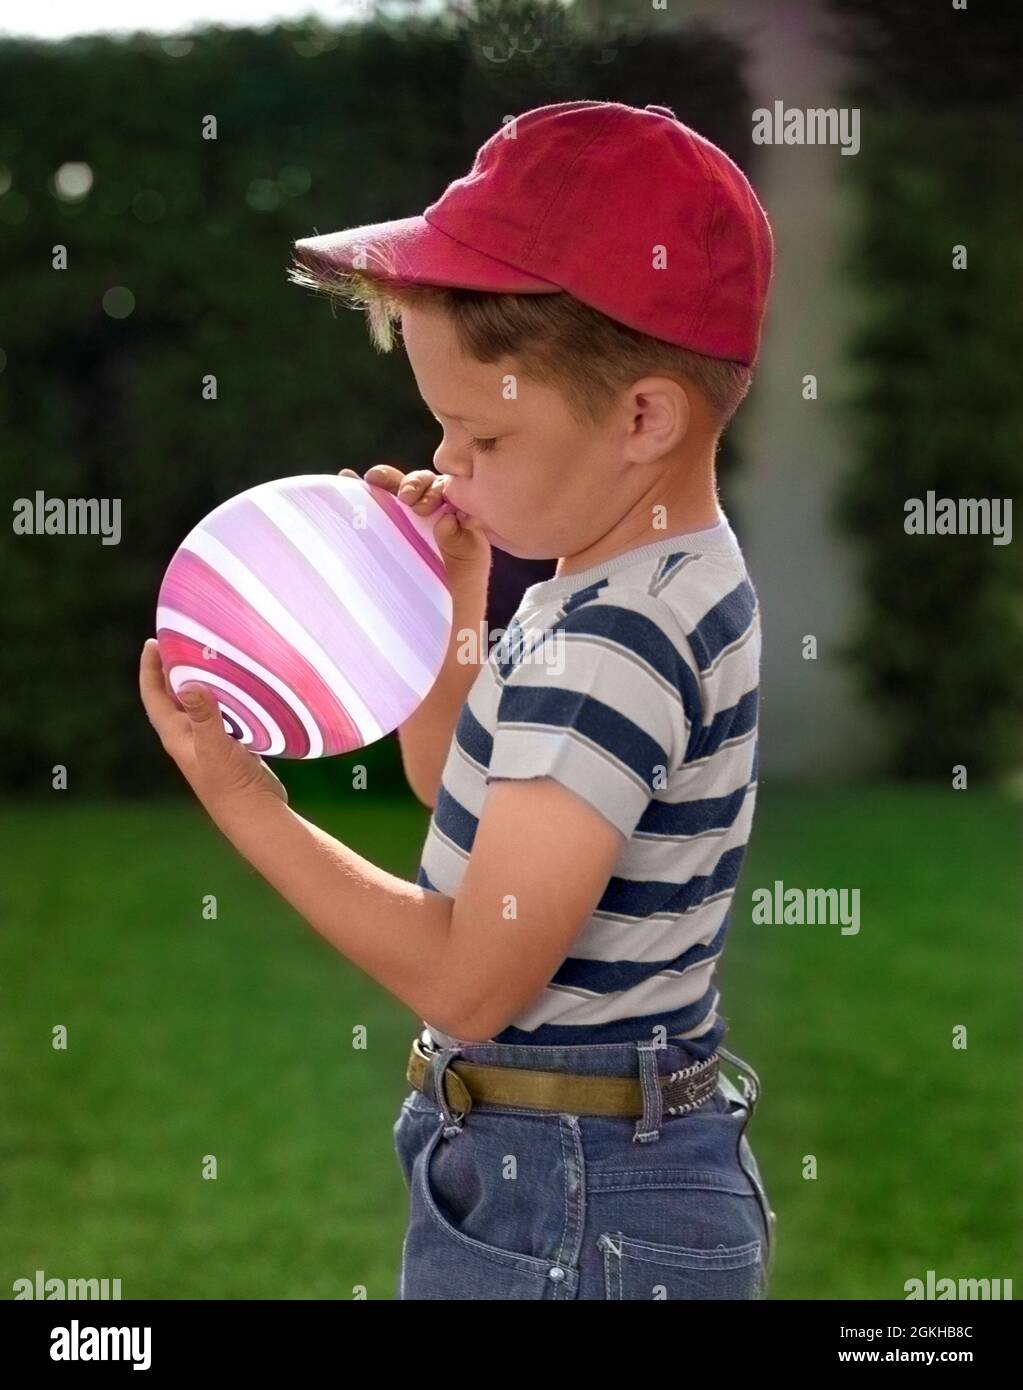 1950s PROFILE OF BOY IN BASEBALL CAP & STRIPED T-SHIRT BLOWING UP STRIPED BALLOON - j630c PUN001 HARS BLOW-UP INFLATING T-SHIRT BLOWING UP BLOWUP CHILDHOOD JUVENILES SWIRLED TASK BALL CAP BLACK AND WHITE CAUCASIAN ETHNICITY CONCENTRATION OLD FASHIONED Stock Photo